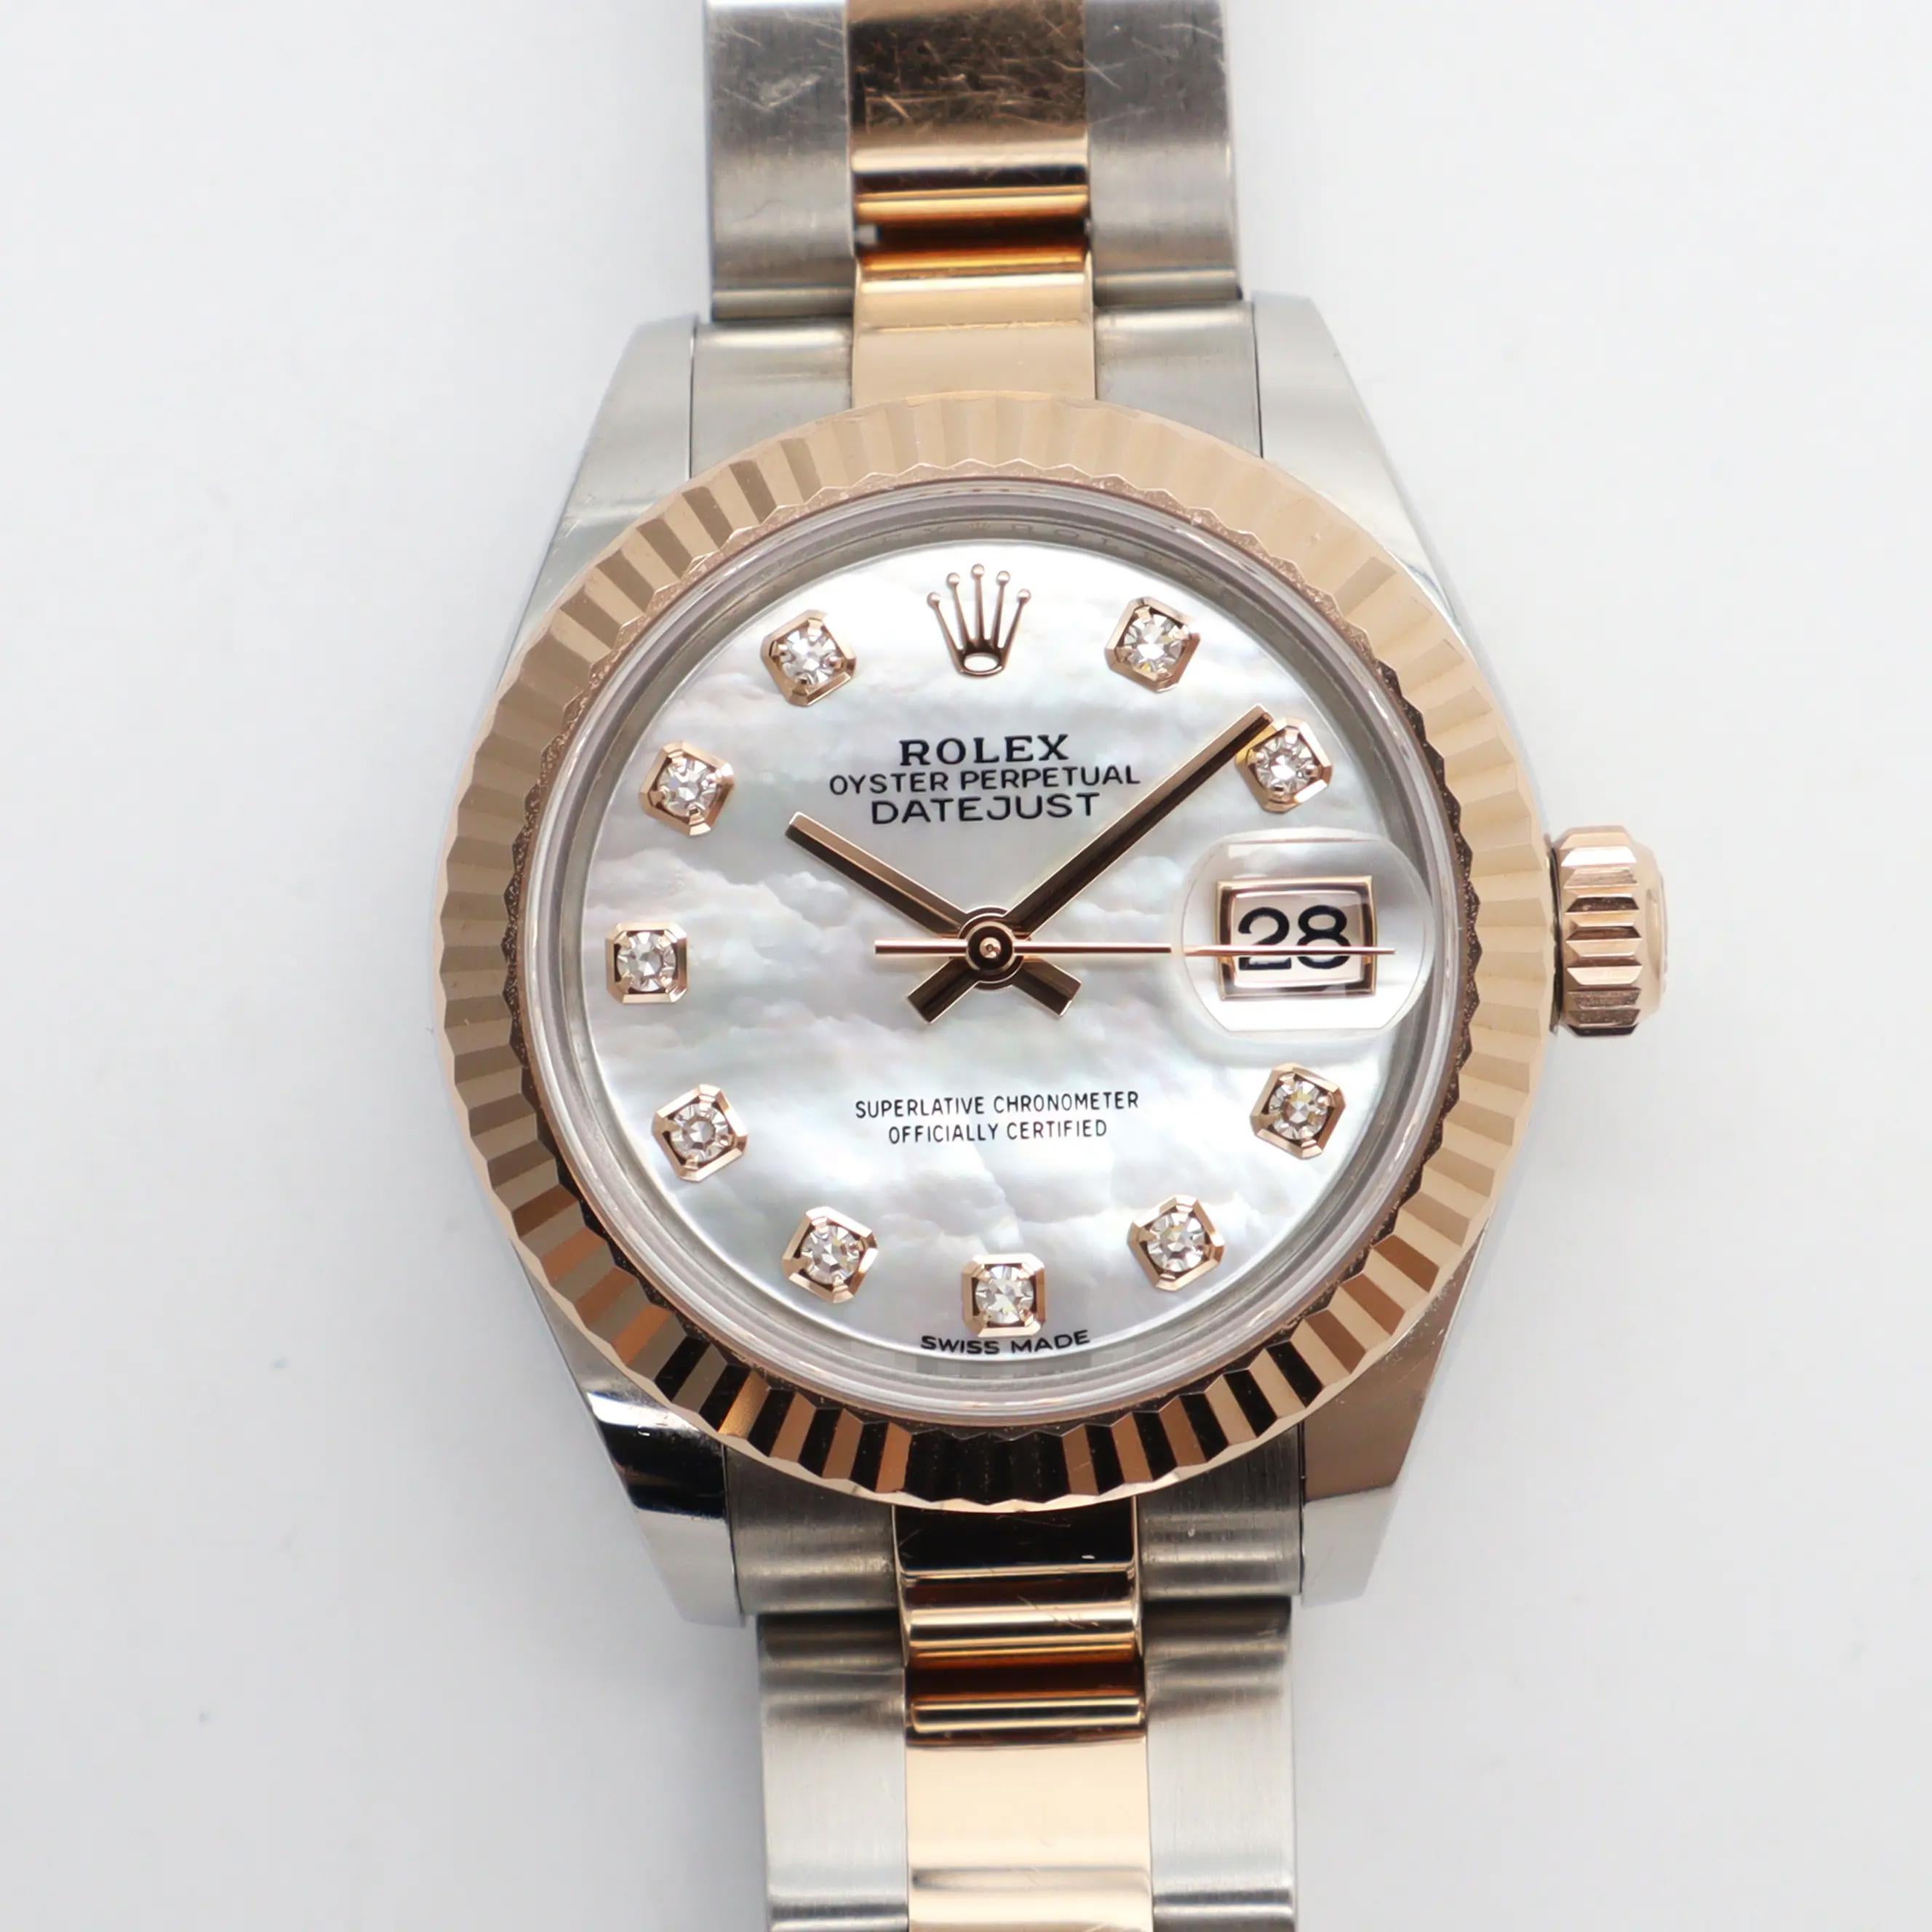 Rolex Lady-Datejust 28mm 18k Rose Gold Steel MOP Diamond Dial Watch 279171 For Sale 2